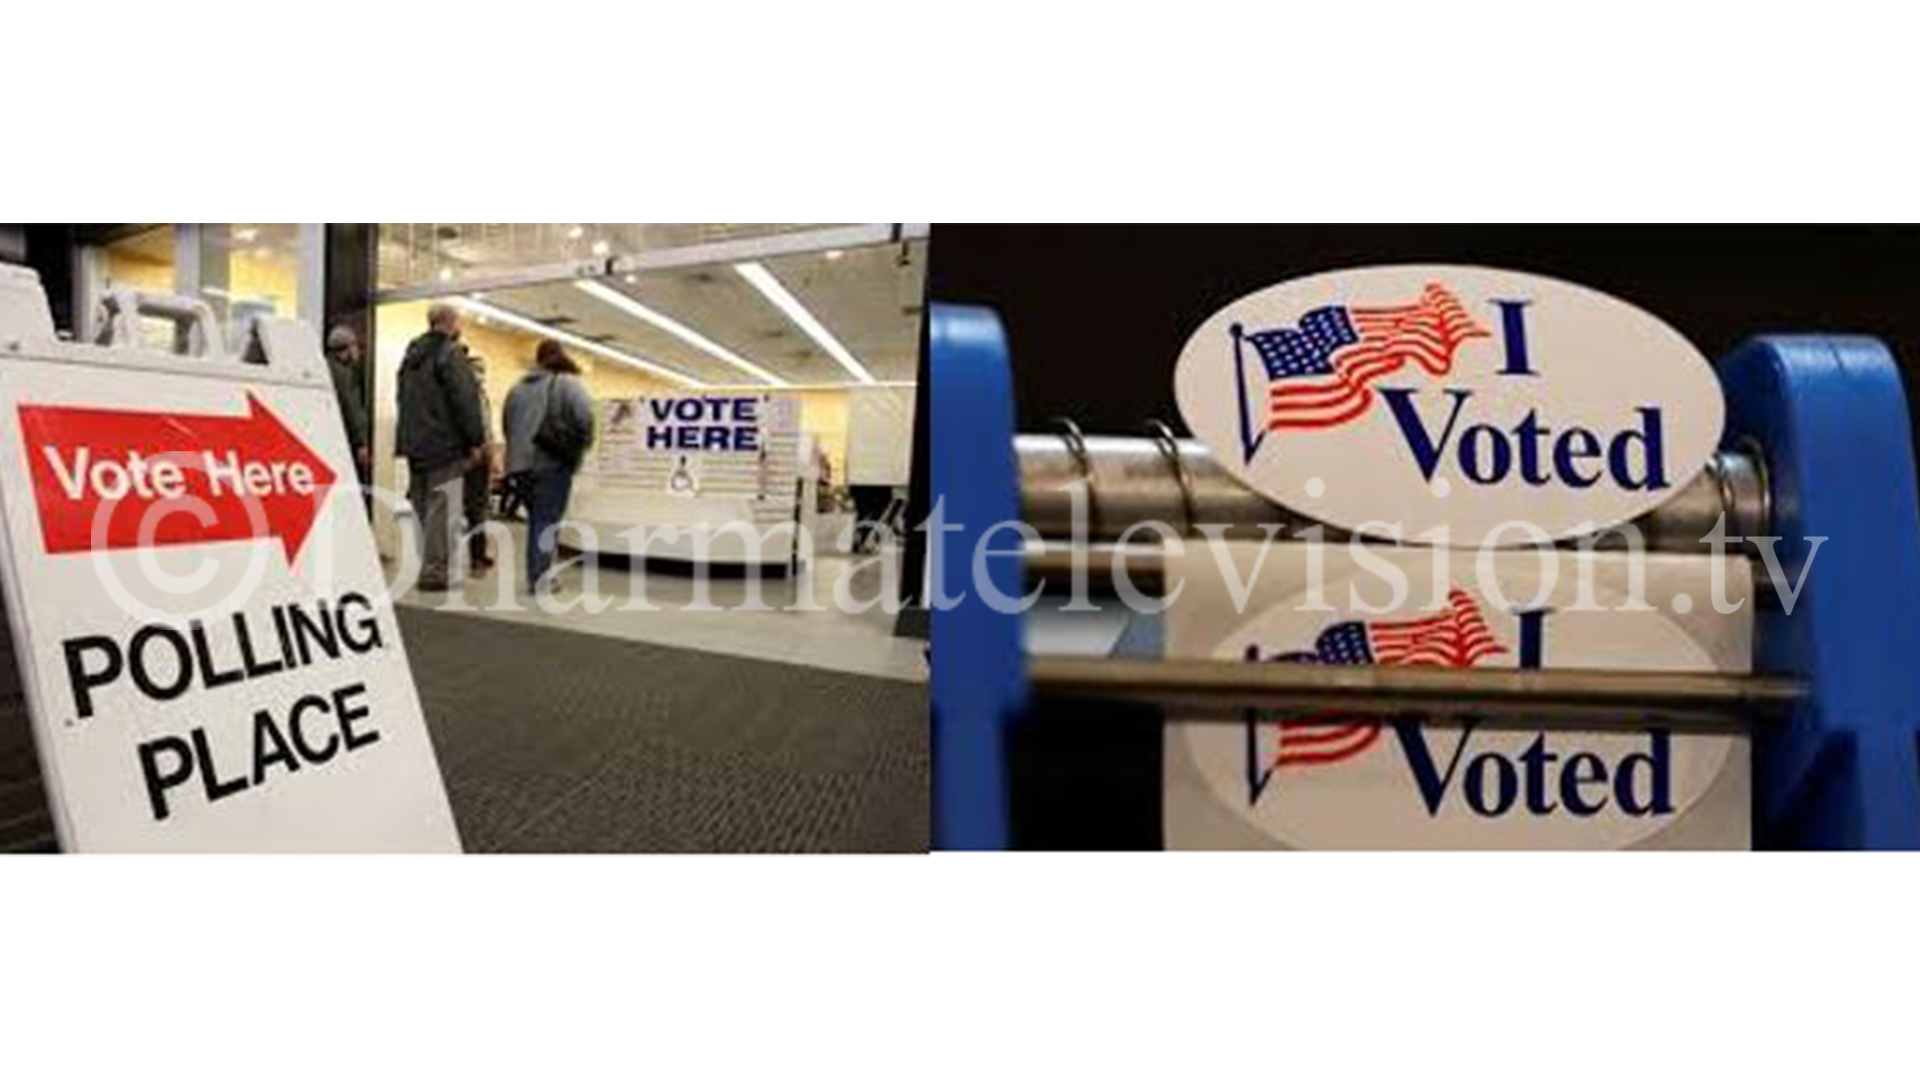 More than 90 million vote early in US Elections